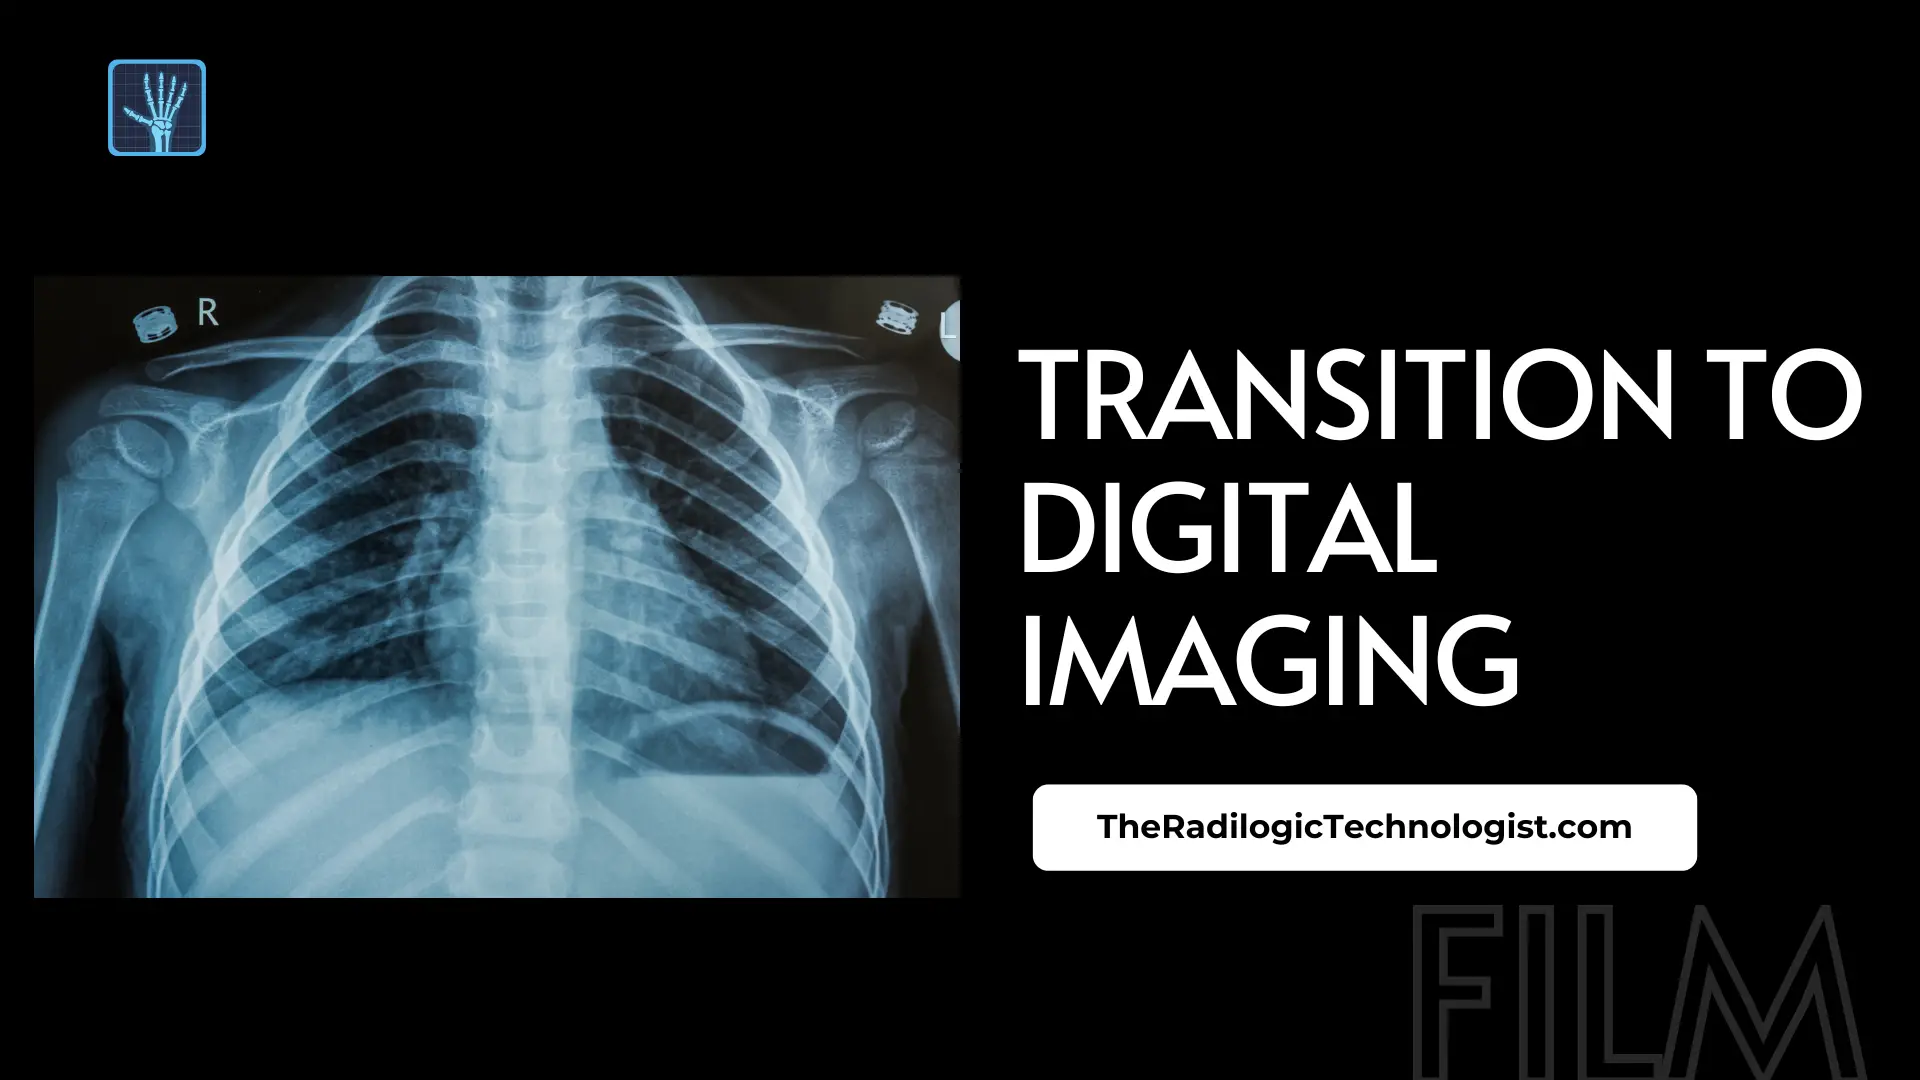 Transition to Digital Imaging: Perspectives of X-ray Technologists